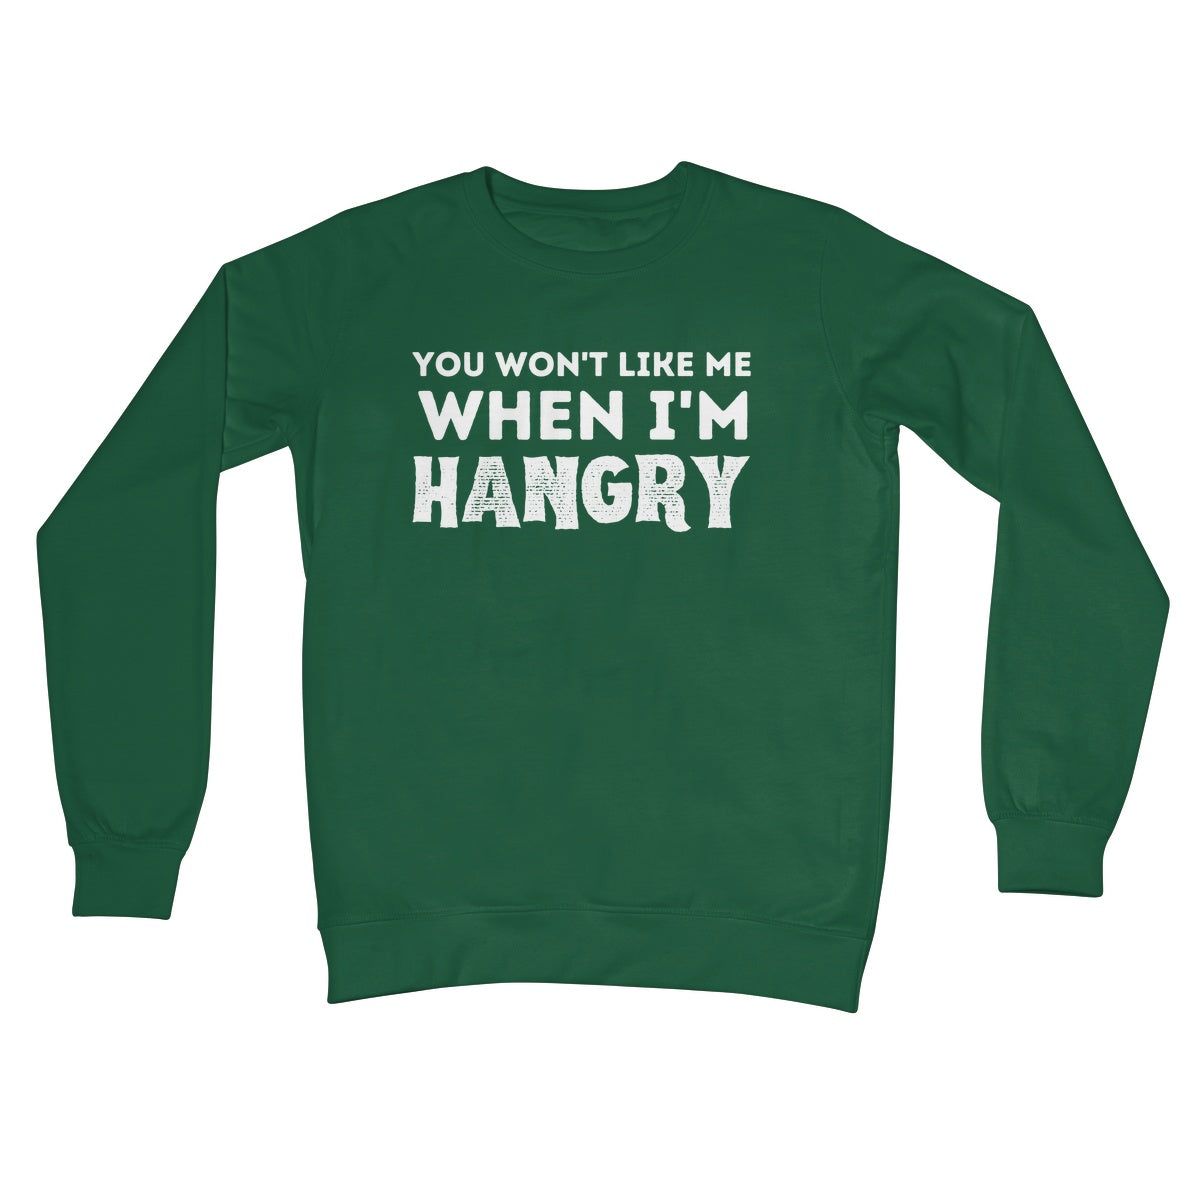 you won't like me when I'm hangry jumper green